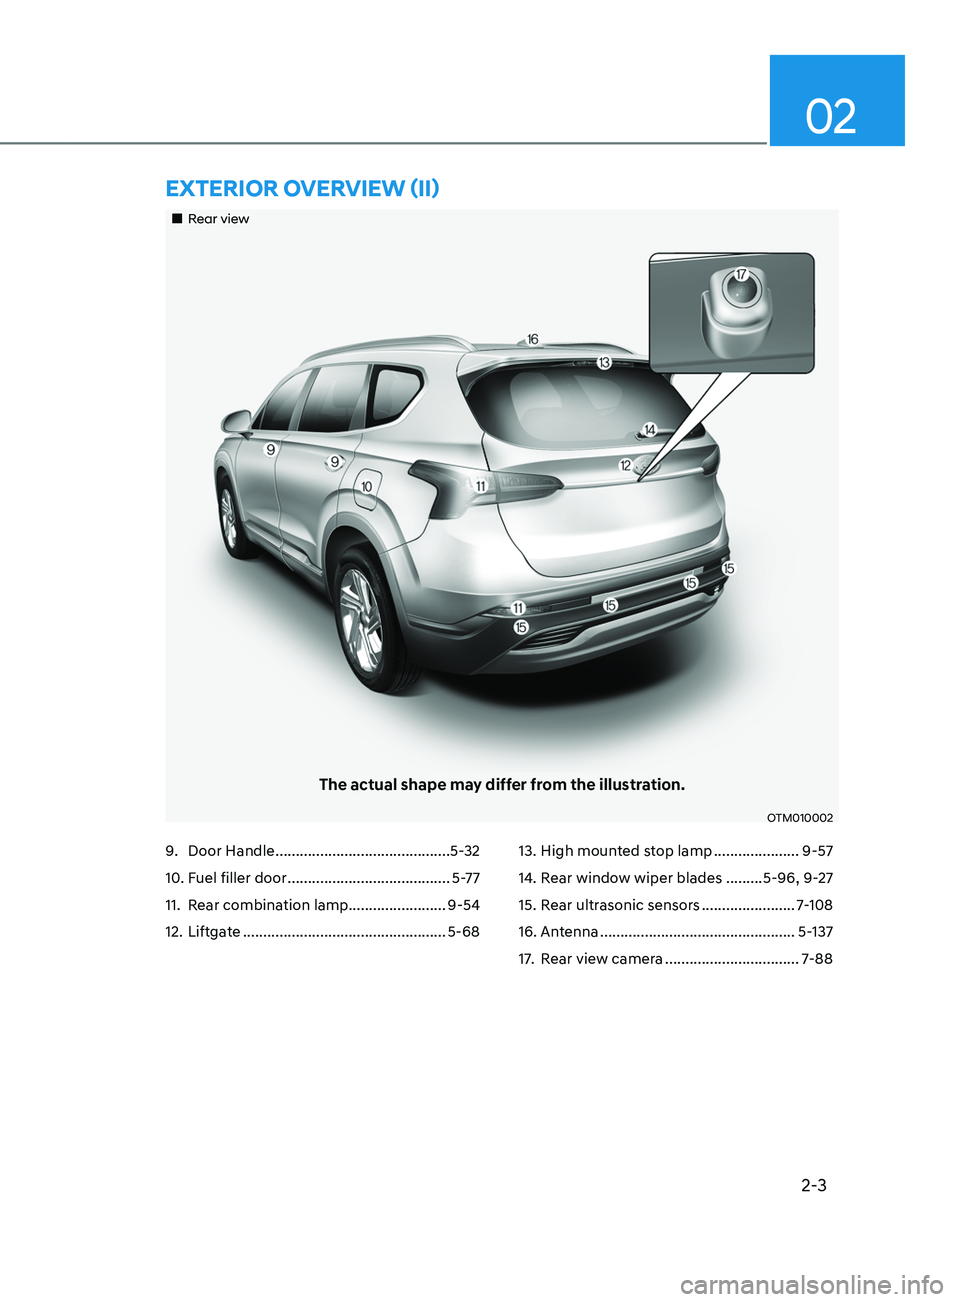 HYUNDAI SANTA FE CALLIGRAPHY 2021 User Guide 2-3
02
„„Rear view
The actual shape may differ from the illustration.
OTM010002
ExTERIOR OVERVIEW (II)
9. Door Handle ...........................................5- 32
10.
 Fuel filler door .